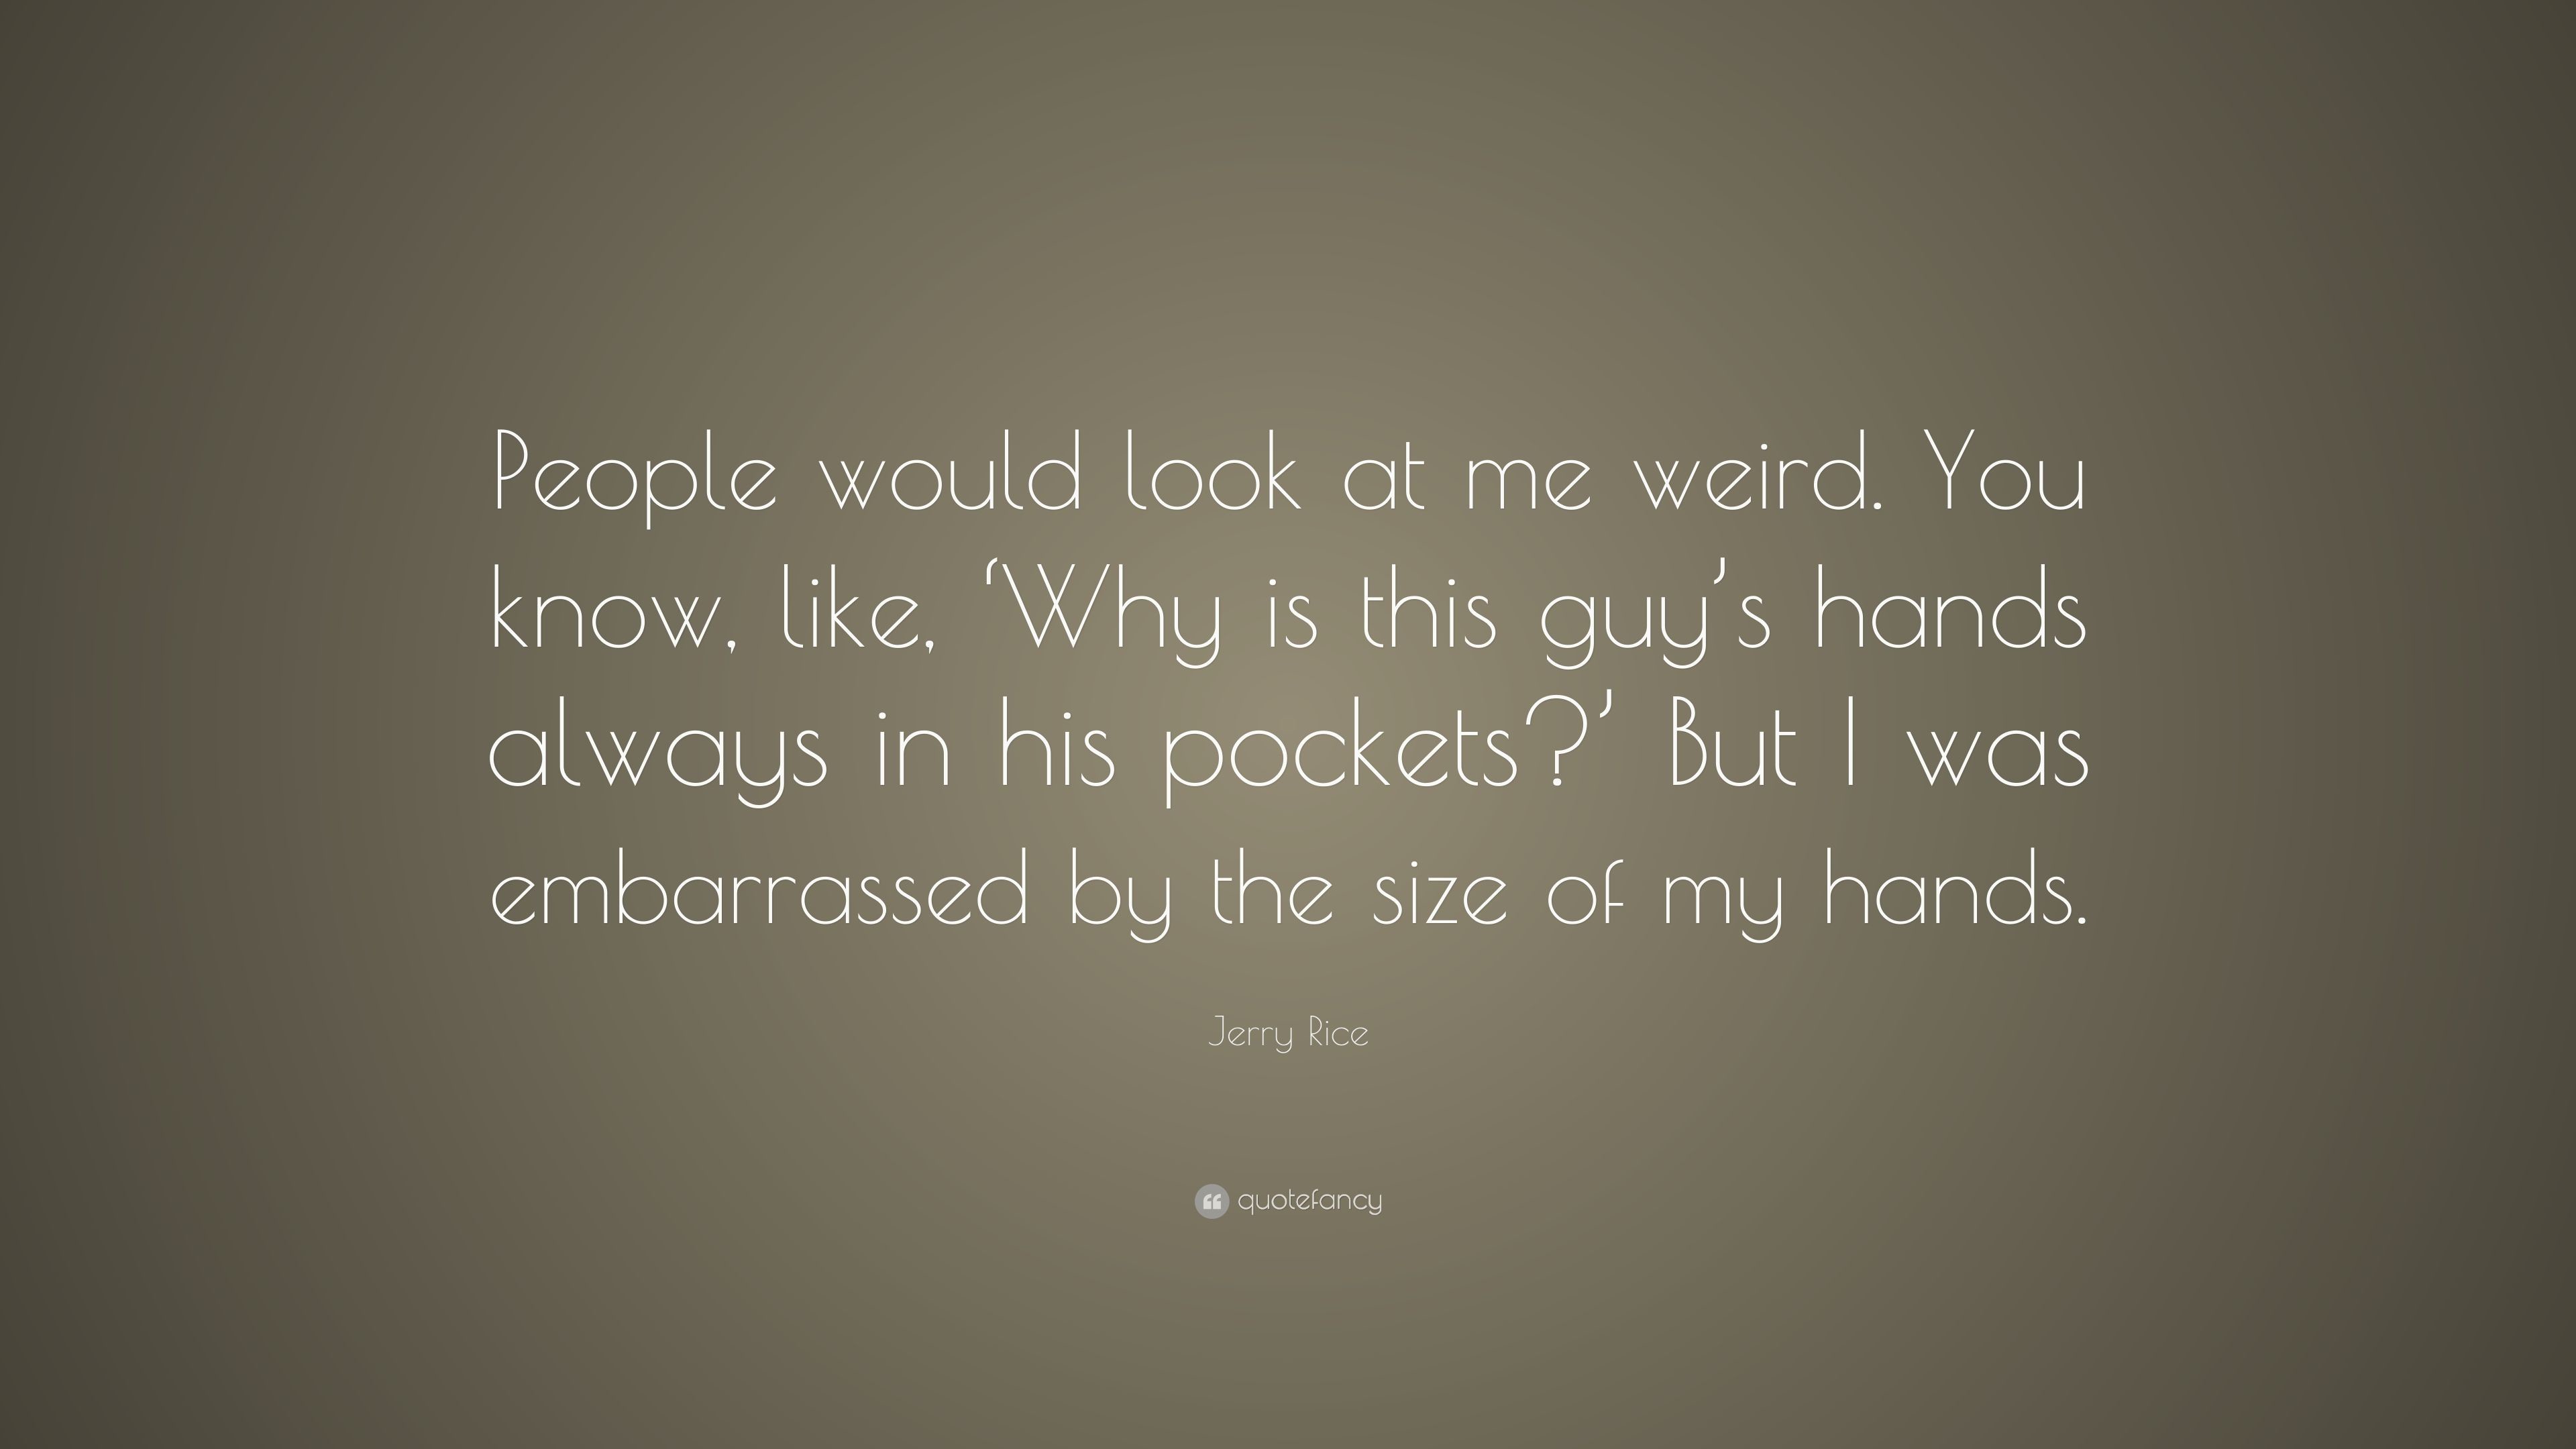 3840x2160 Jerry Rice Quote: “People would look at me weird. You know, like